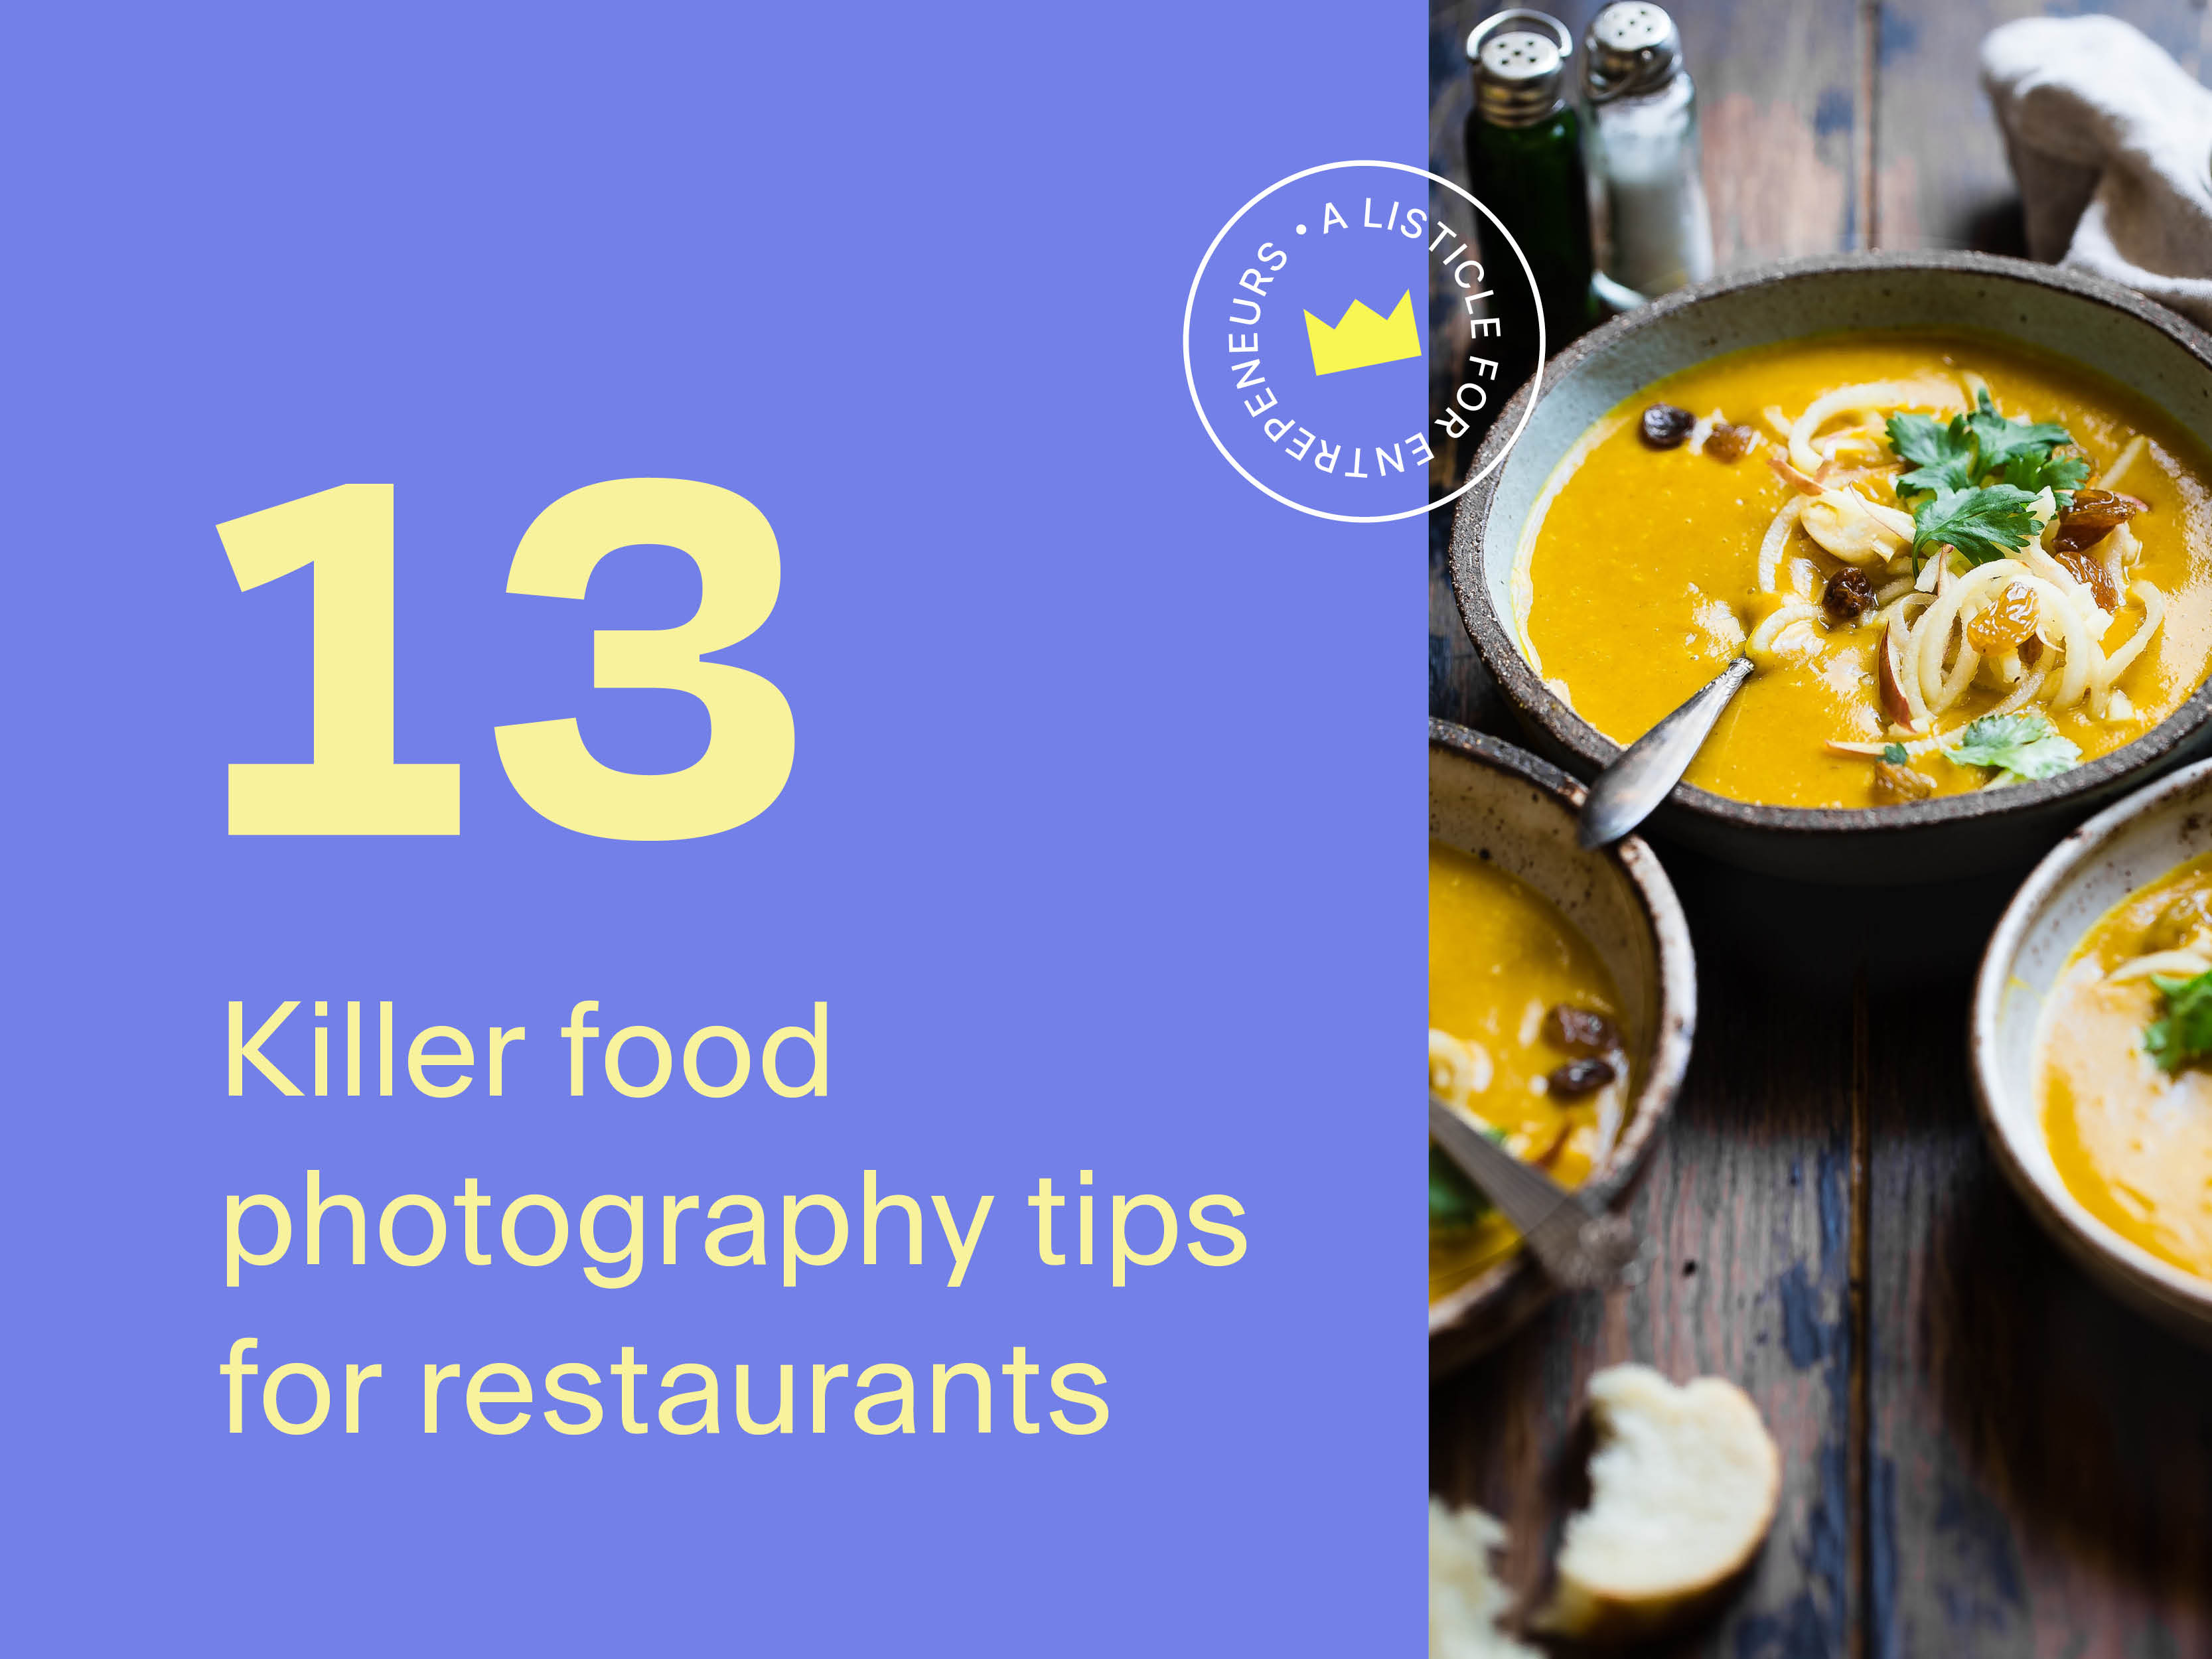 Food photography tips for restaurants.